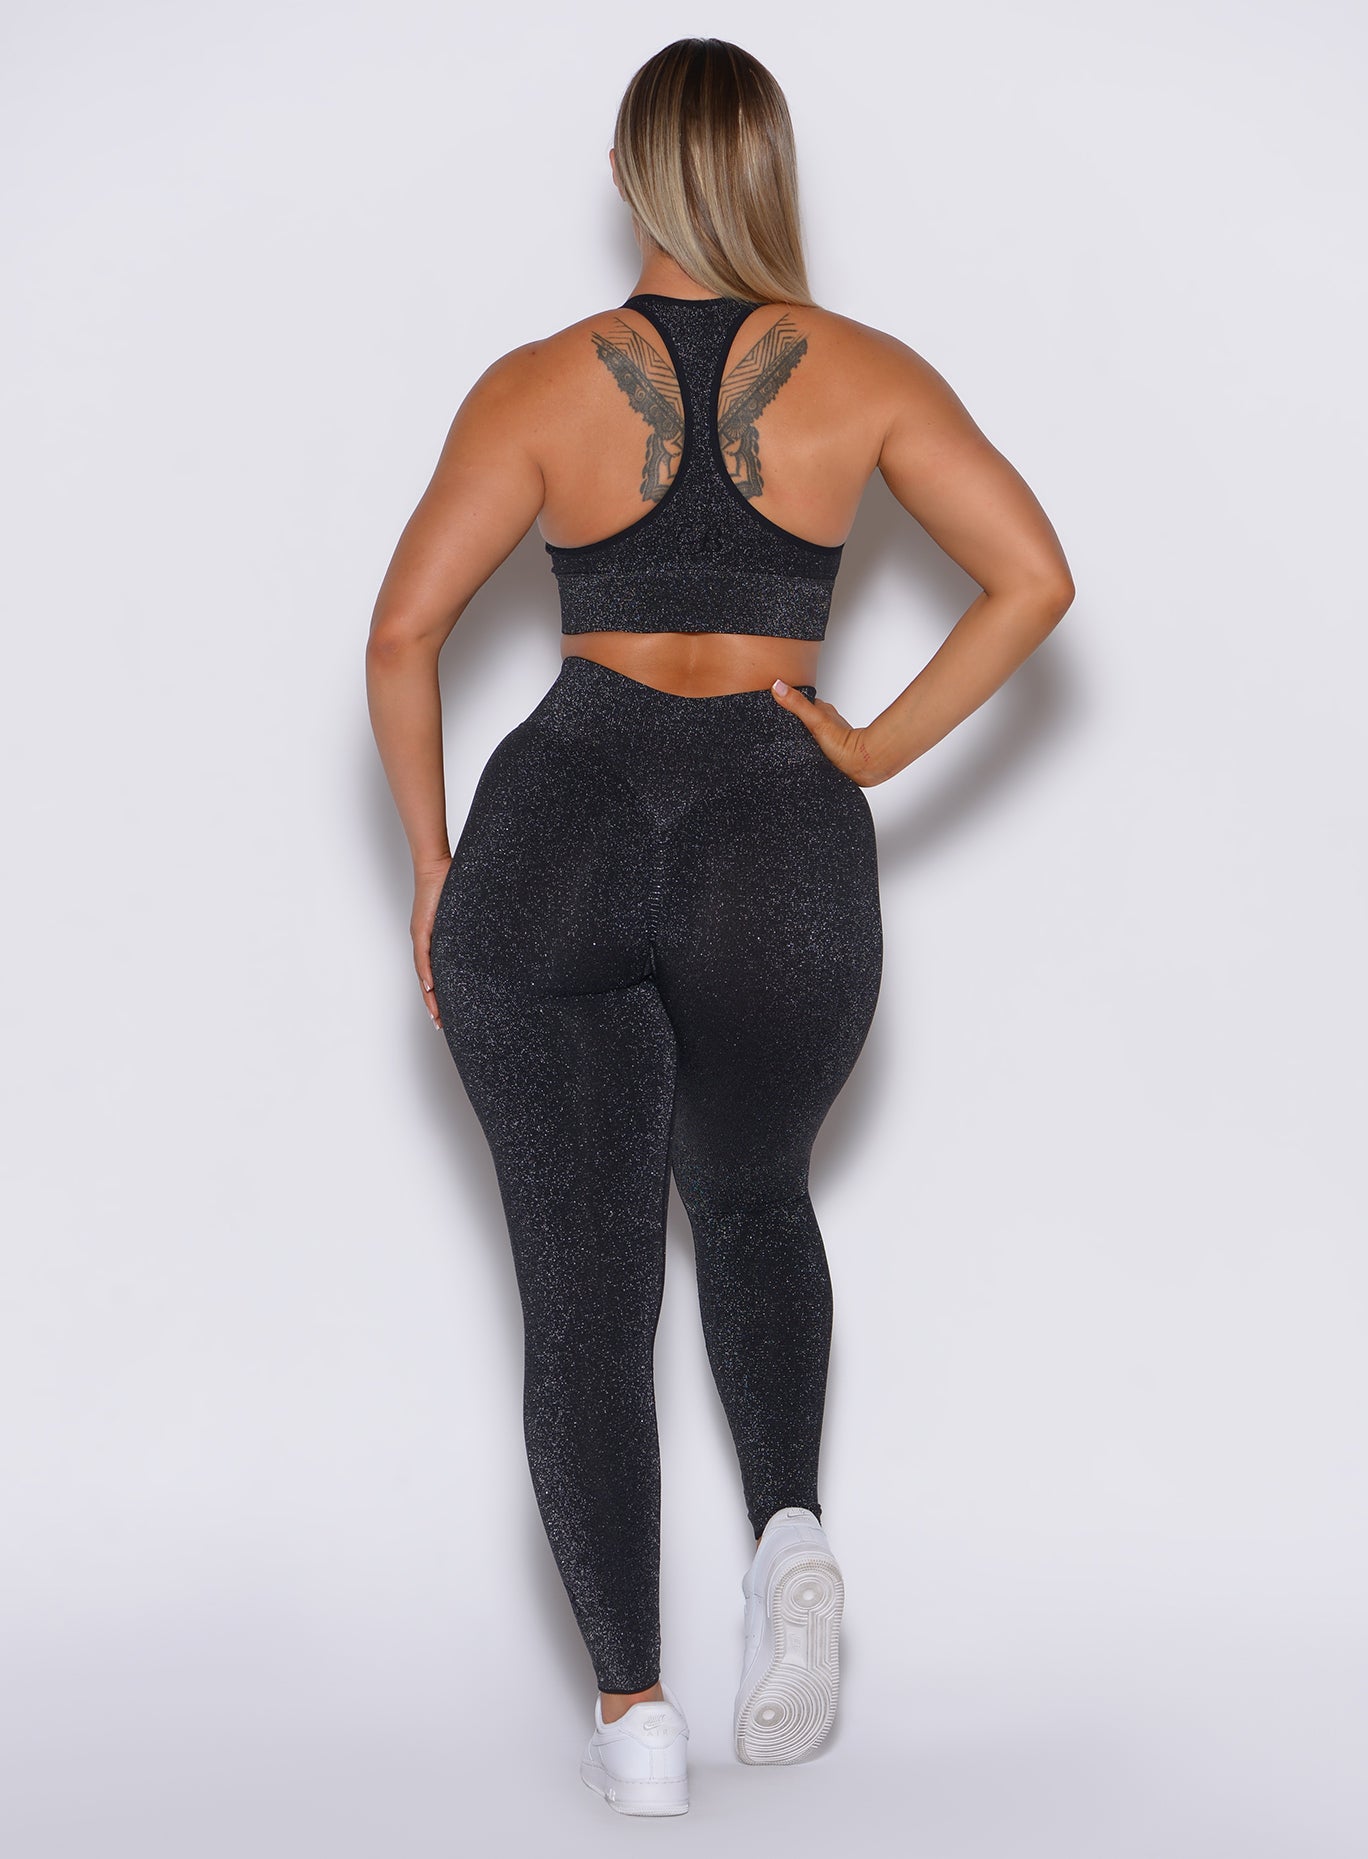 Back profile view of a model wearing our Shimmer Seamless Leggings in black sparkle color along with the matching bra